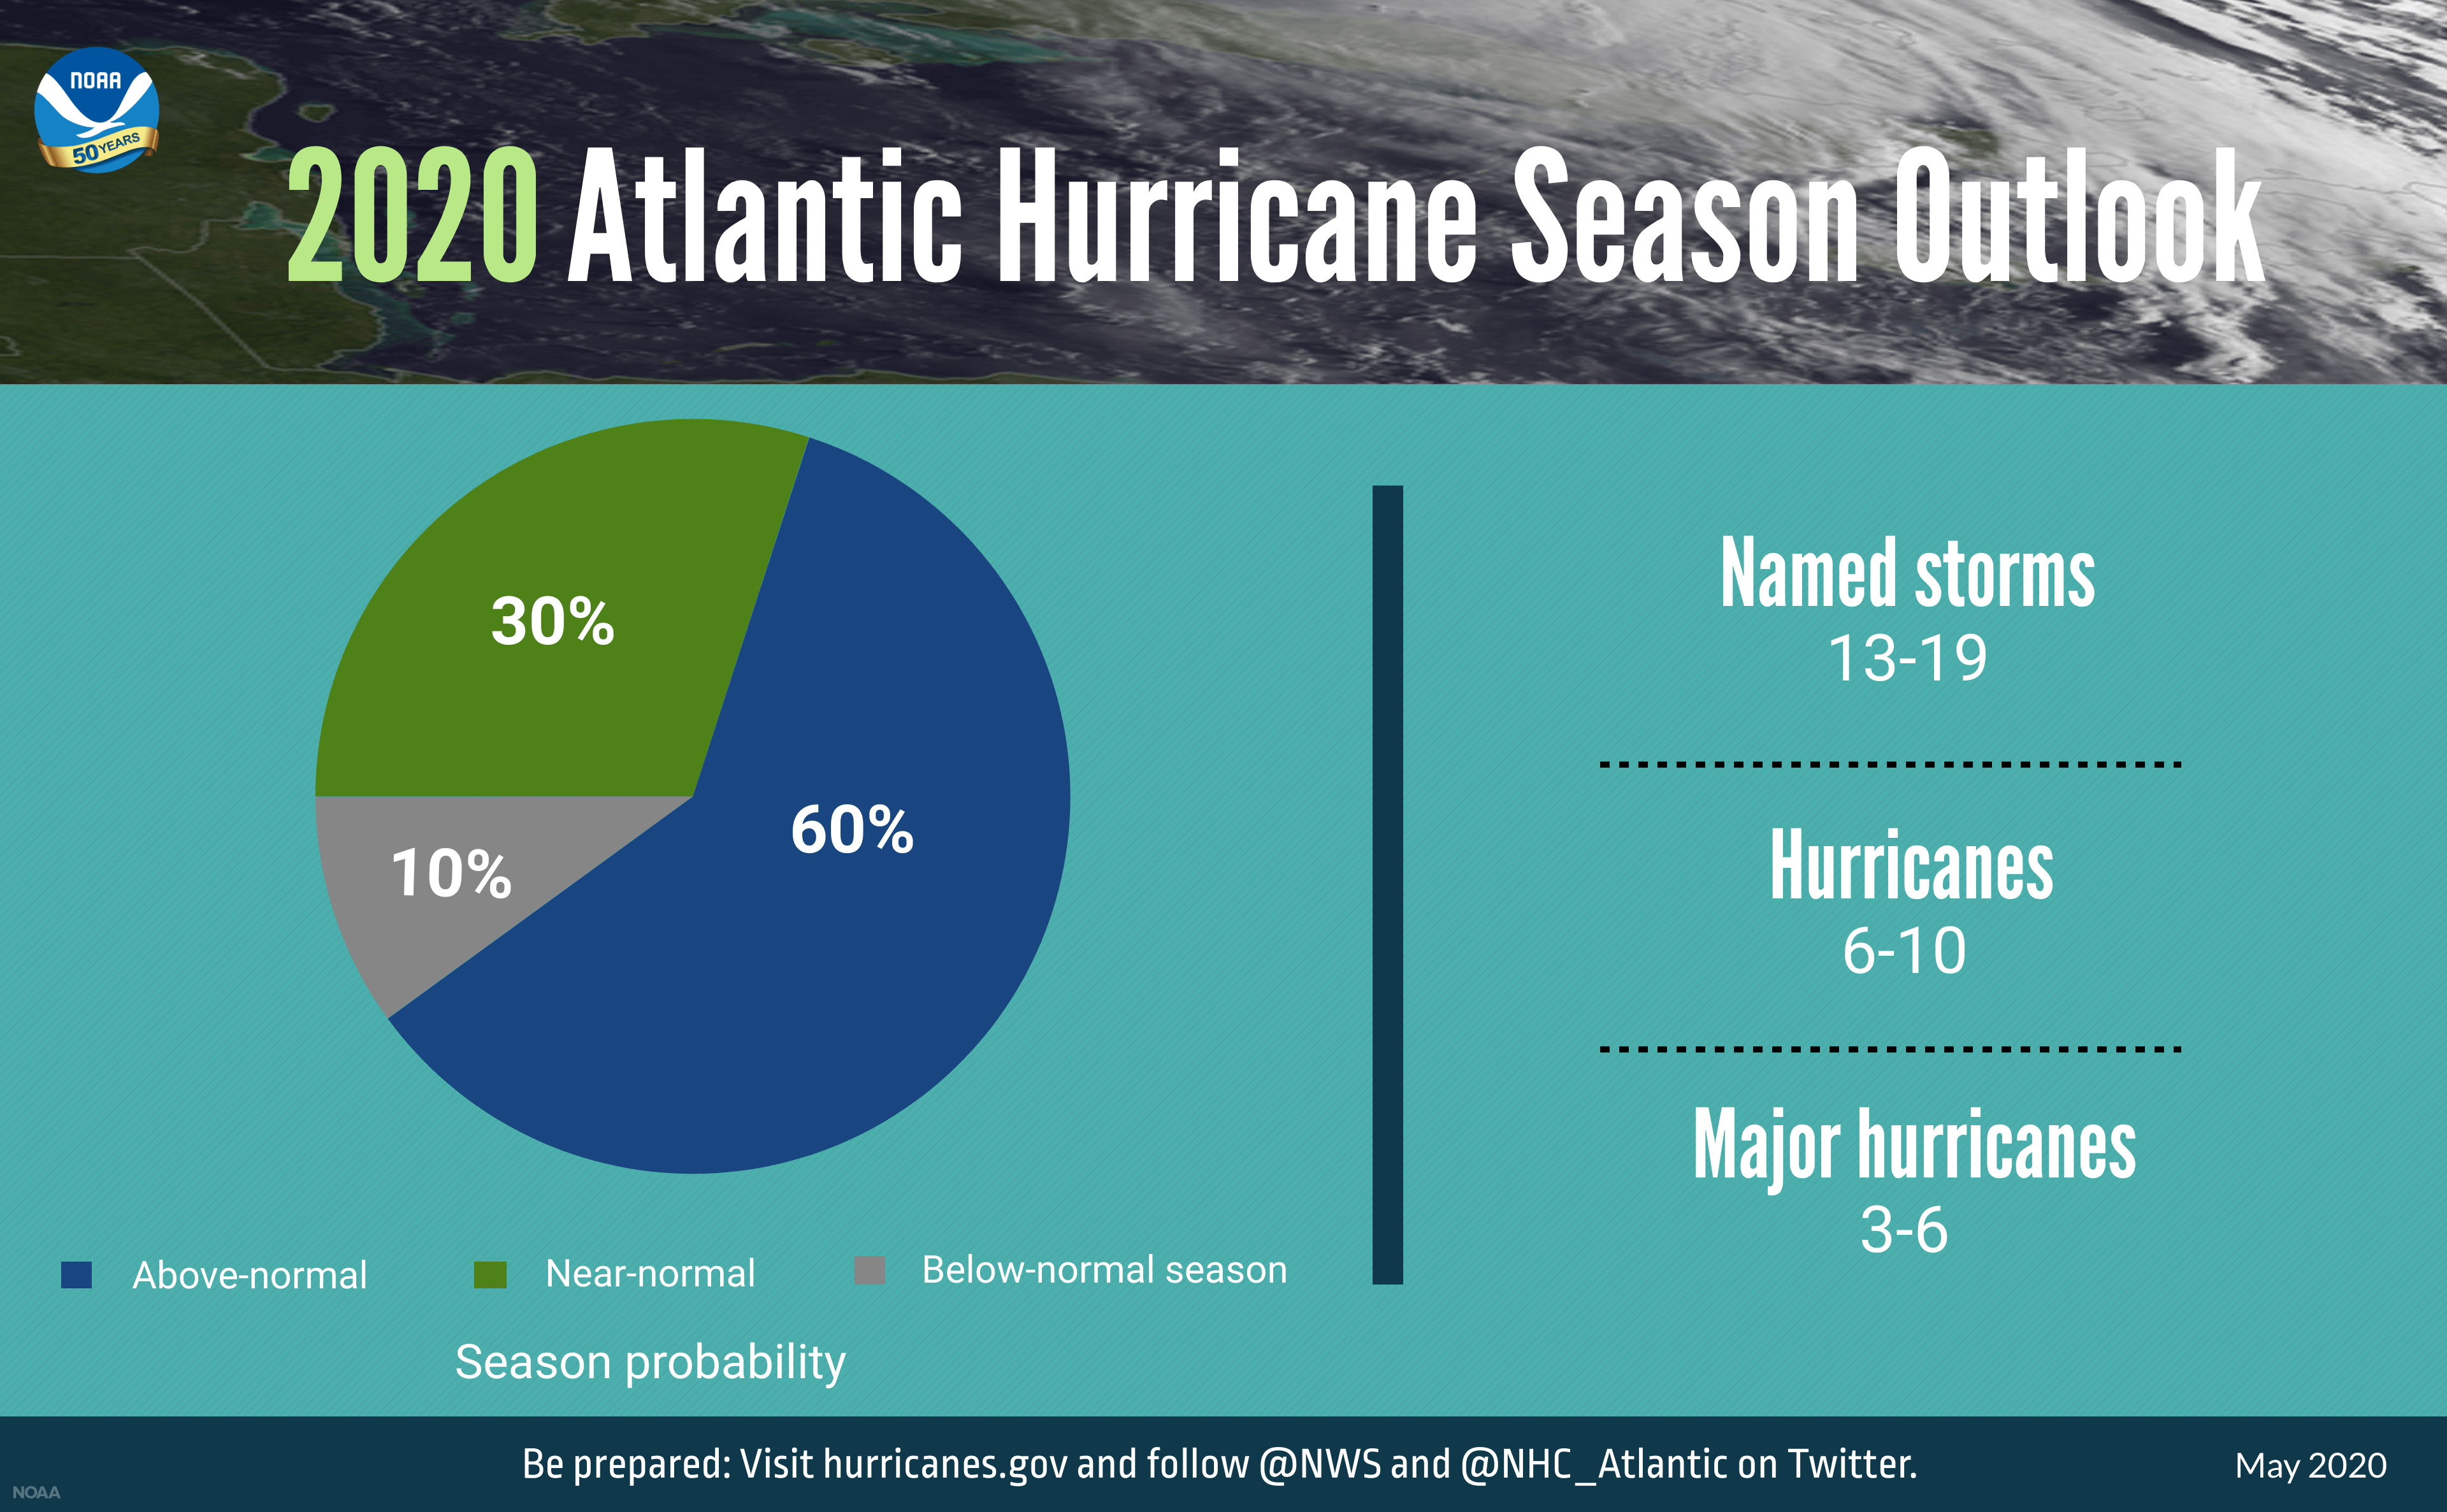 A summary infographic showing hurricane season probability and number of named storms predicted from NOAA’s 2020 Atlantic Hurricane Season Outlook. Forecasters predict it will be a “busy” season.